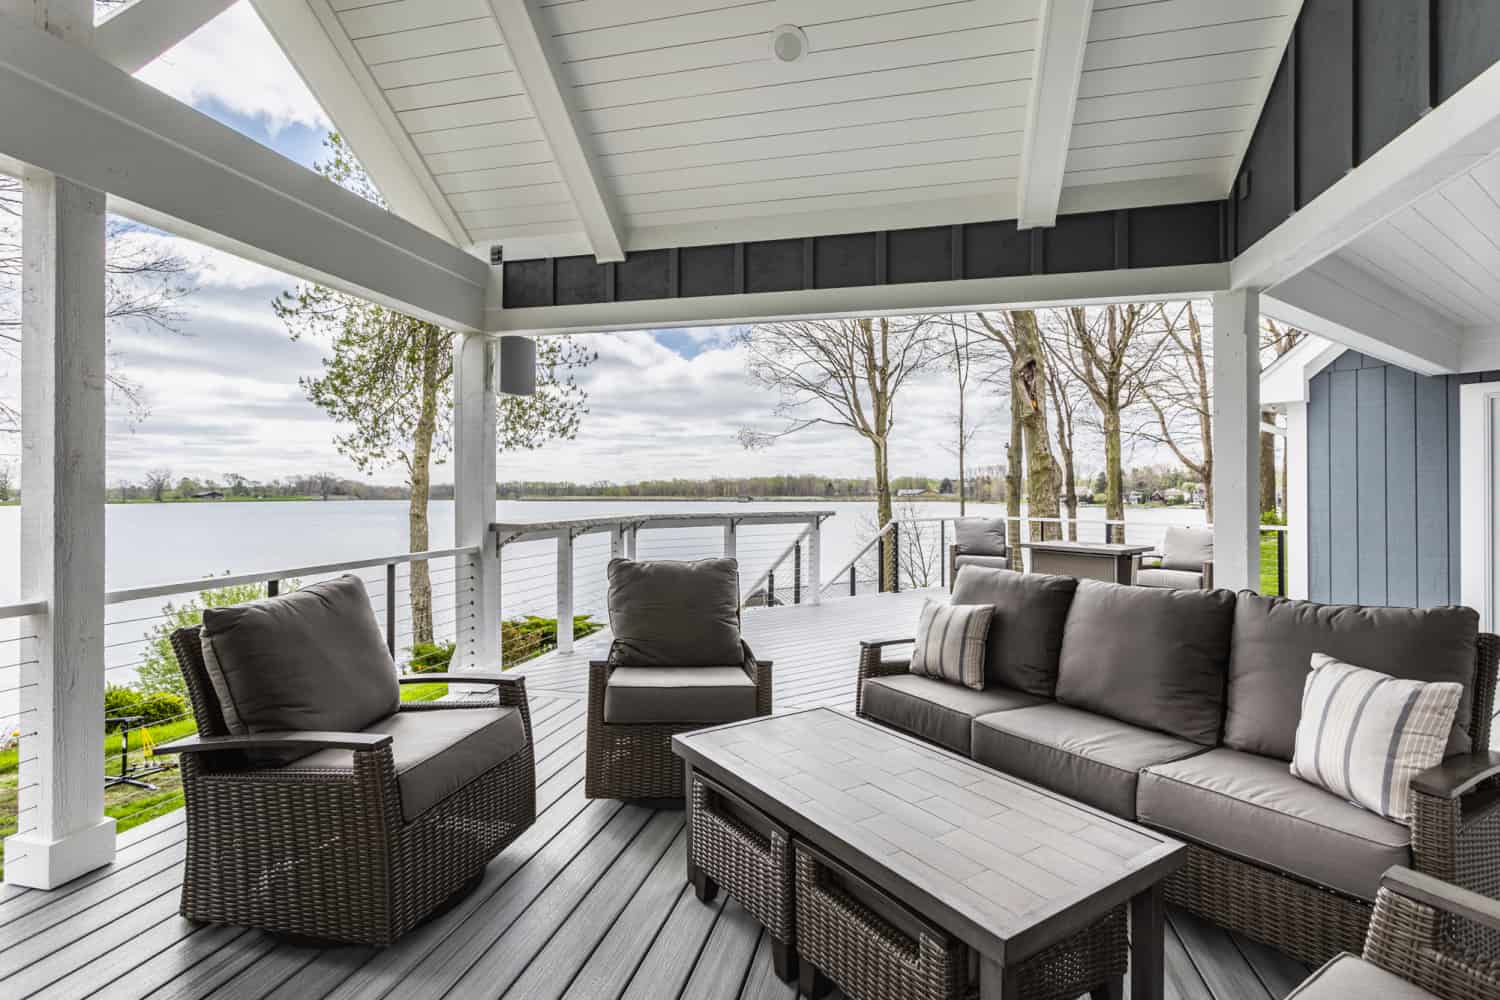 Nicholas Design Build | A remodeled deck with wicker furniture and a serene view of a lake.